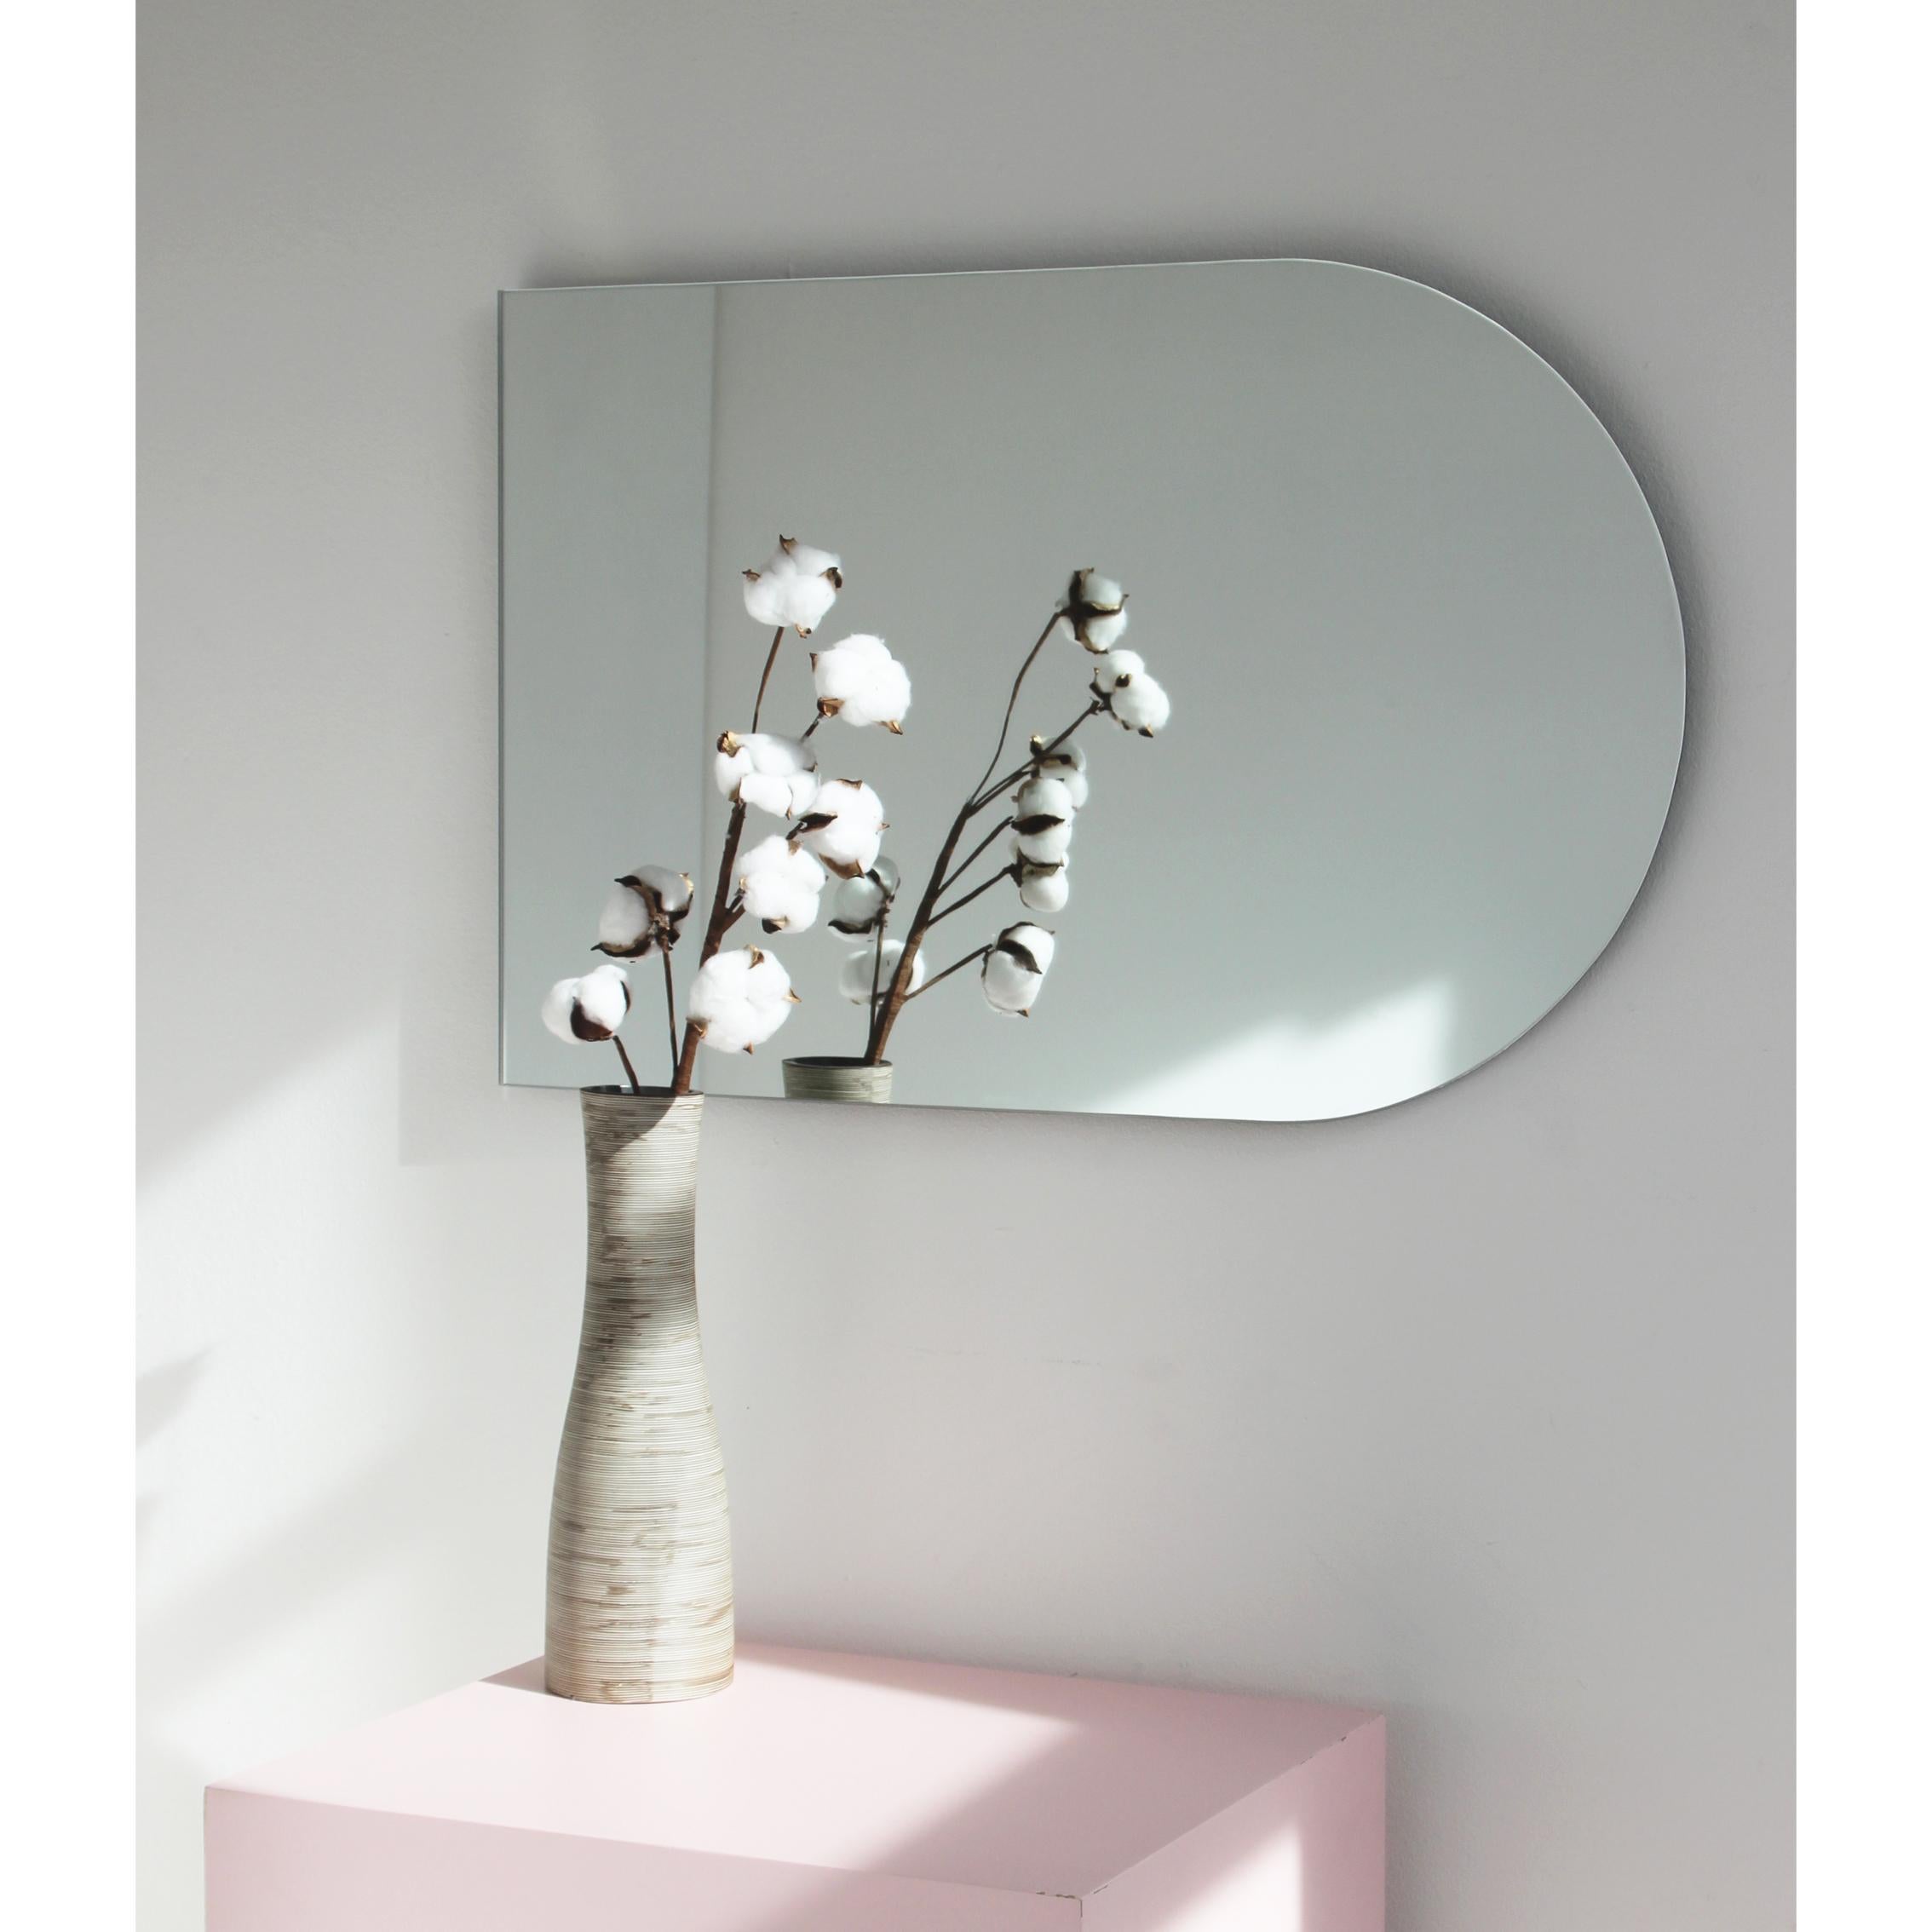 Arcus Arch shaped Contemporary Modern Versatile Frameless Mirror, Large In New Condition For Sale In London, GB